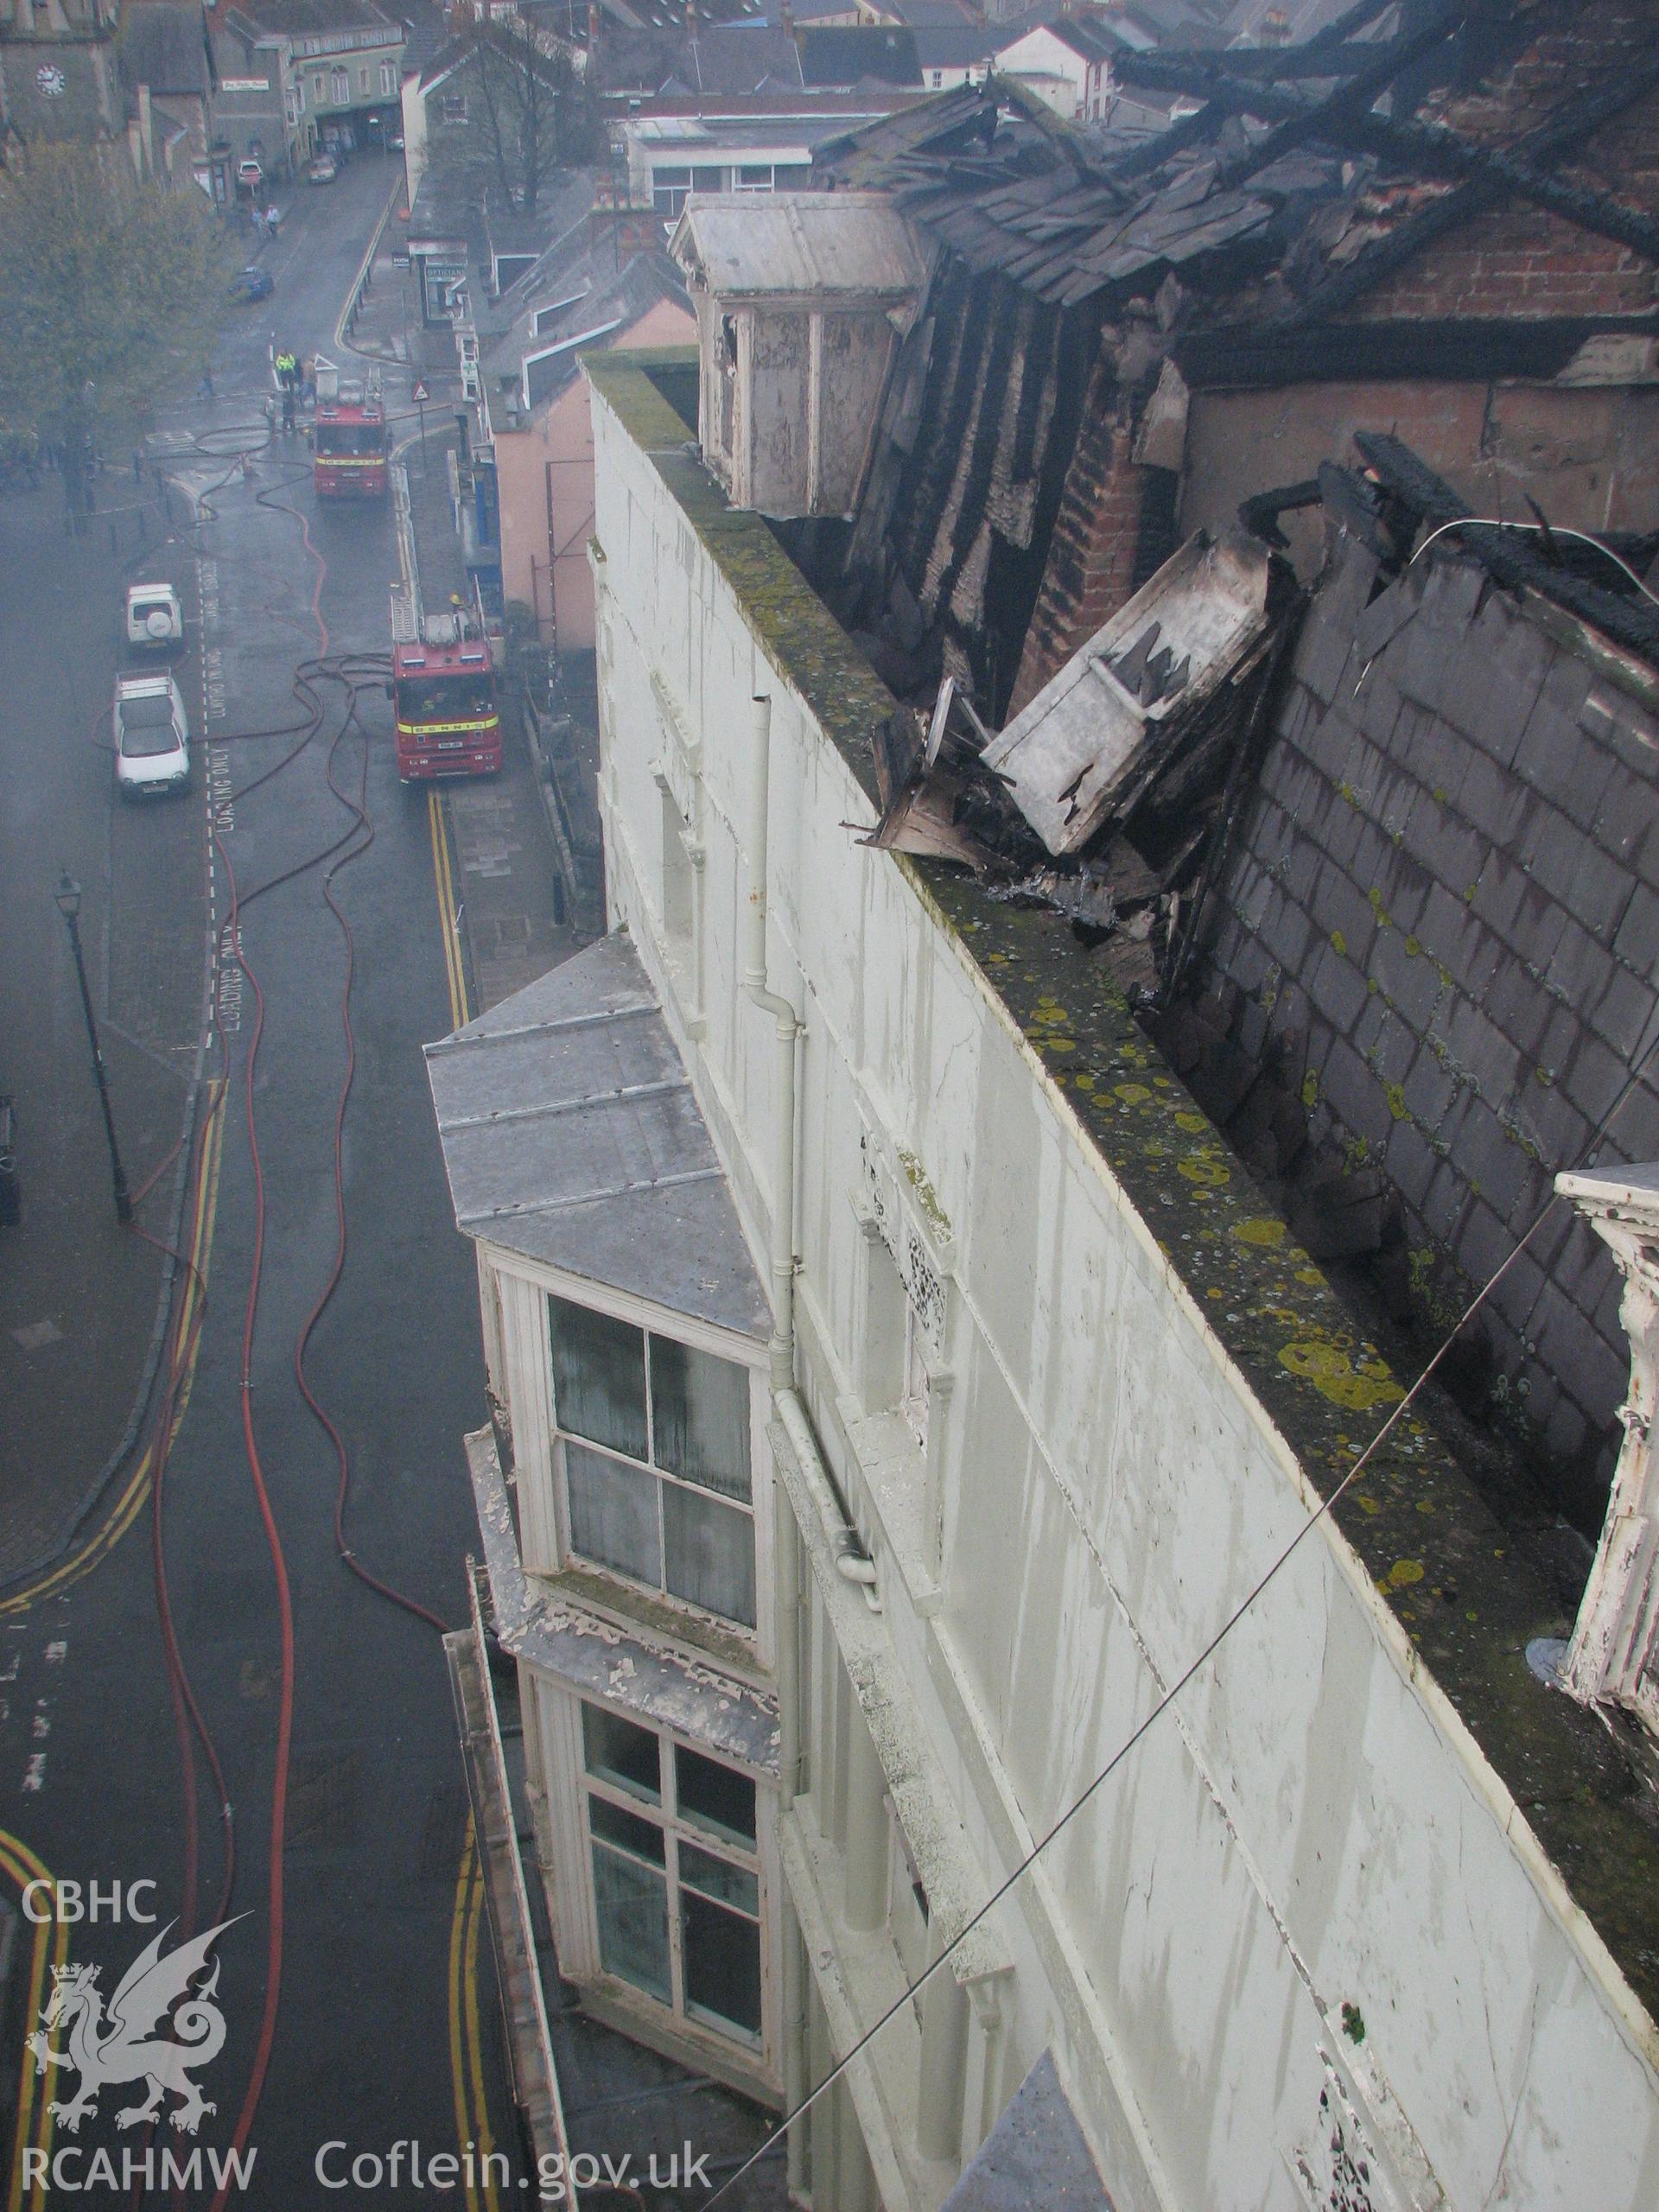 Colour digital photograph showing the damage caused by fire to the exterior of the Royal Gatehouse Hotel.